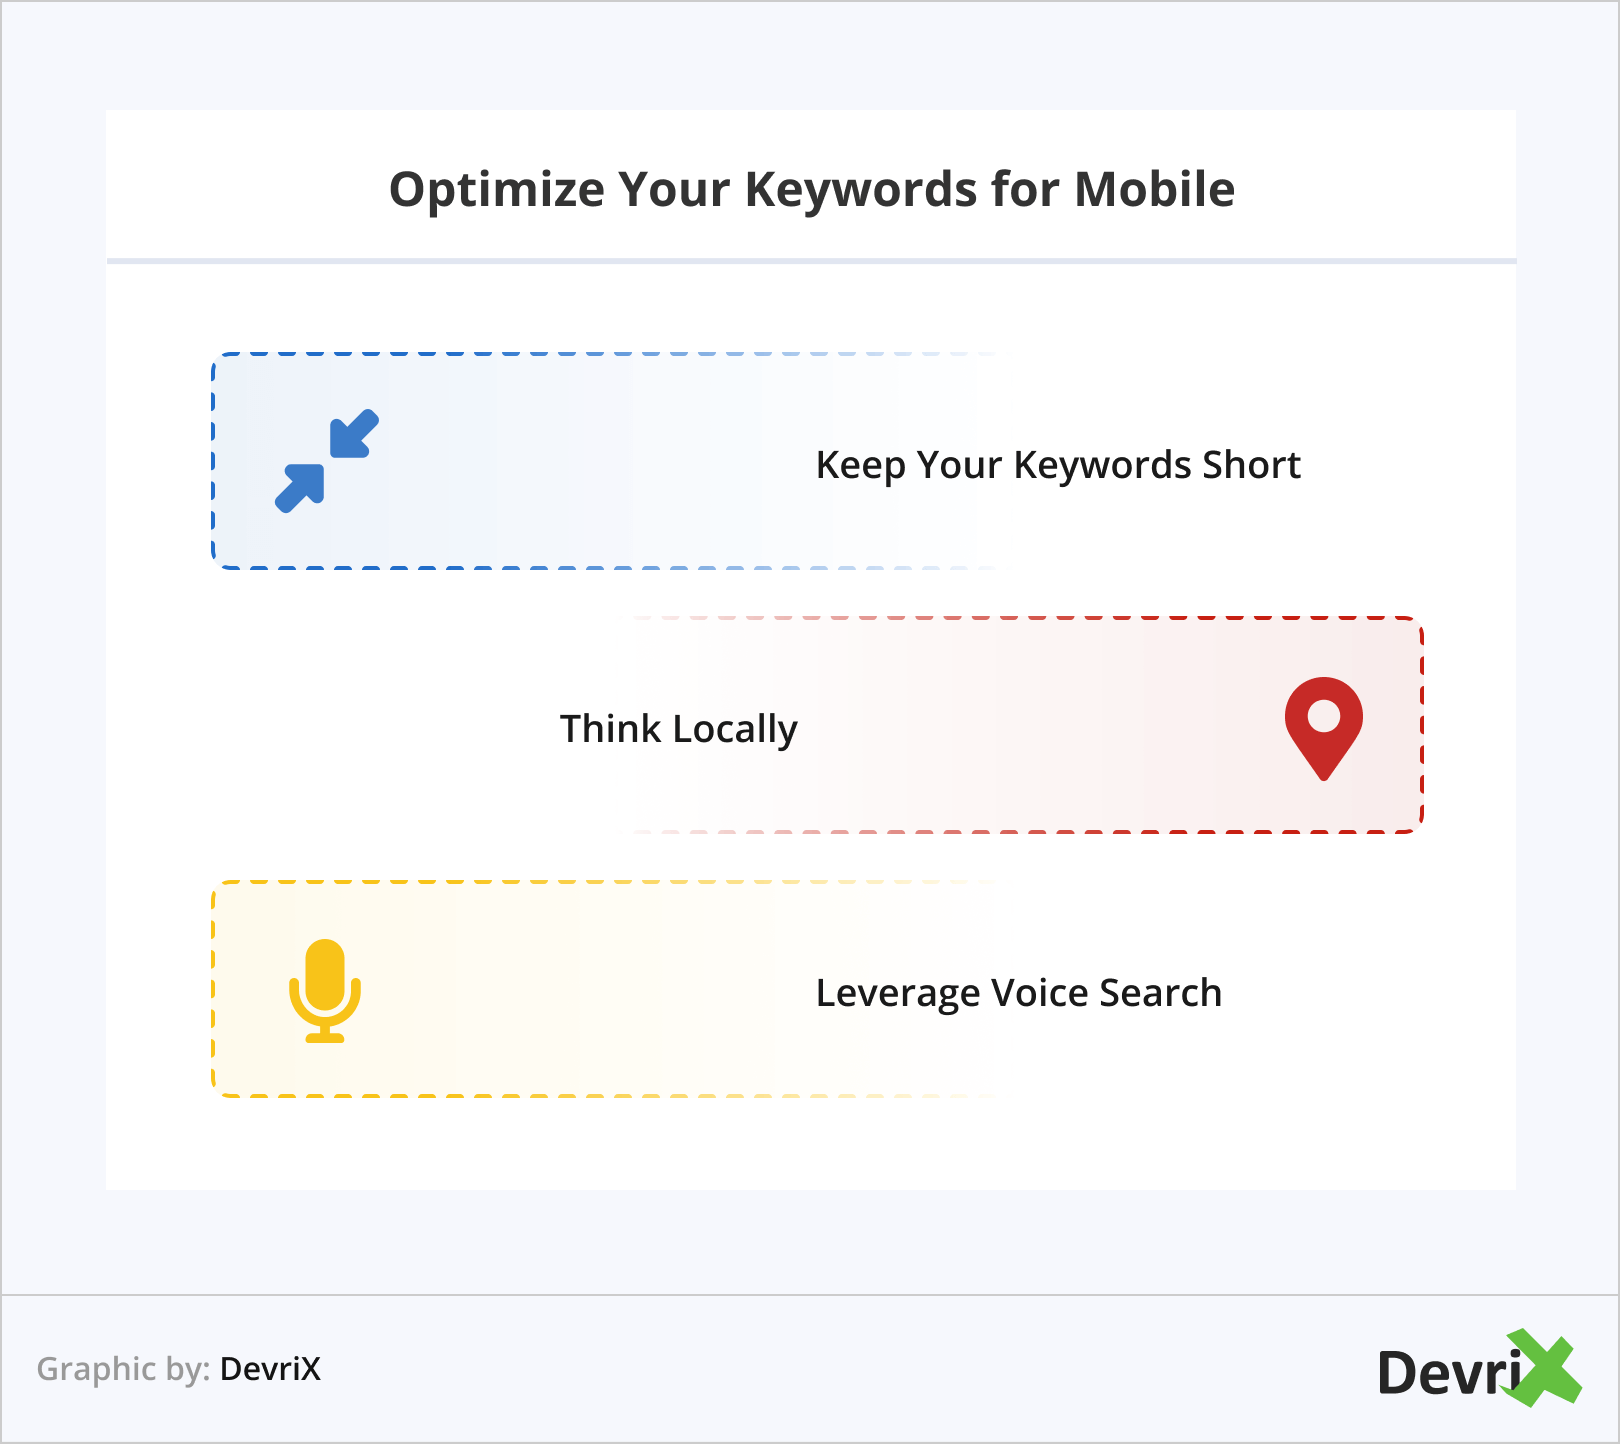 Optimize Your Keywords for Mobile